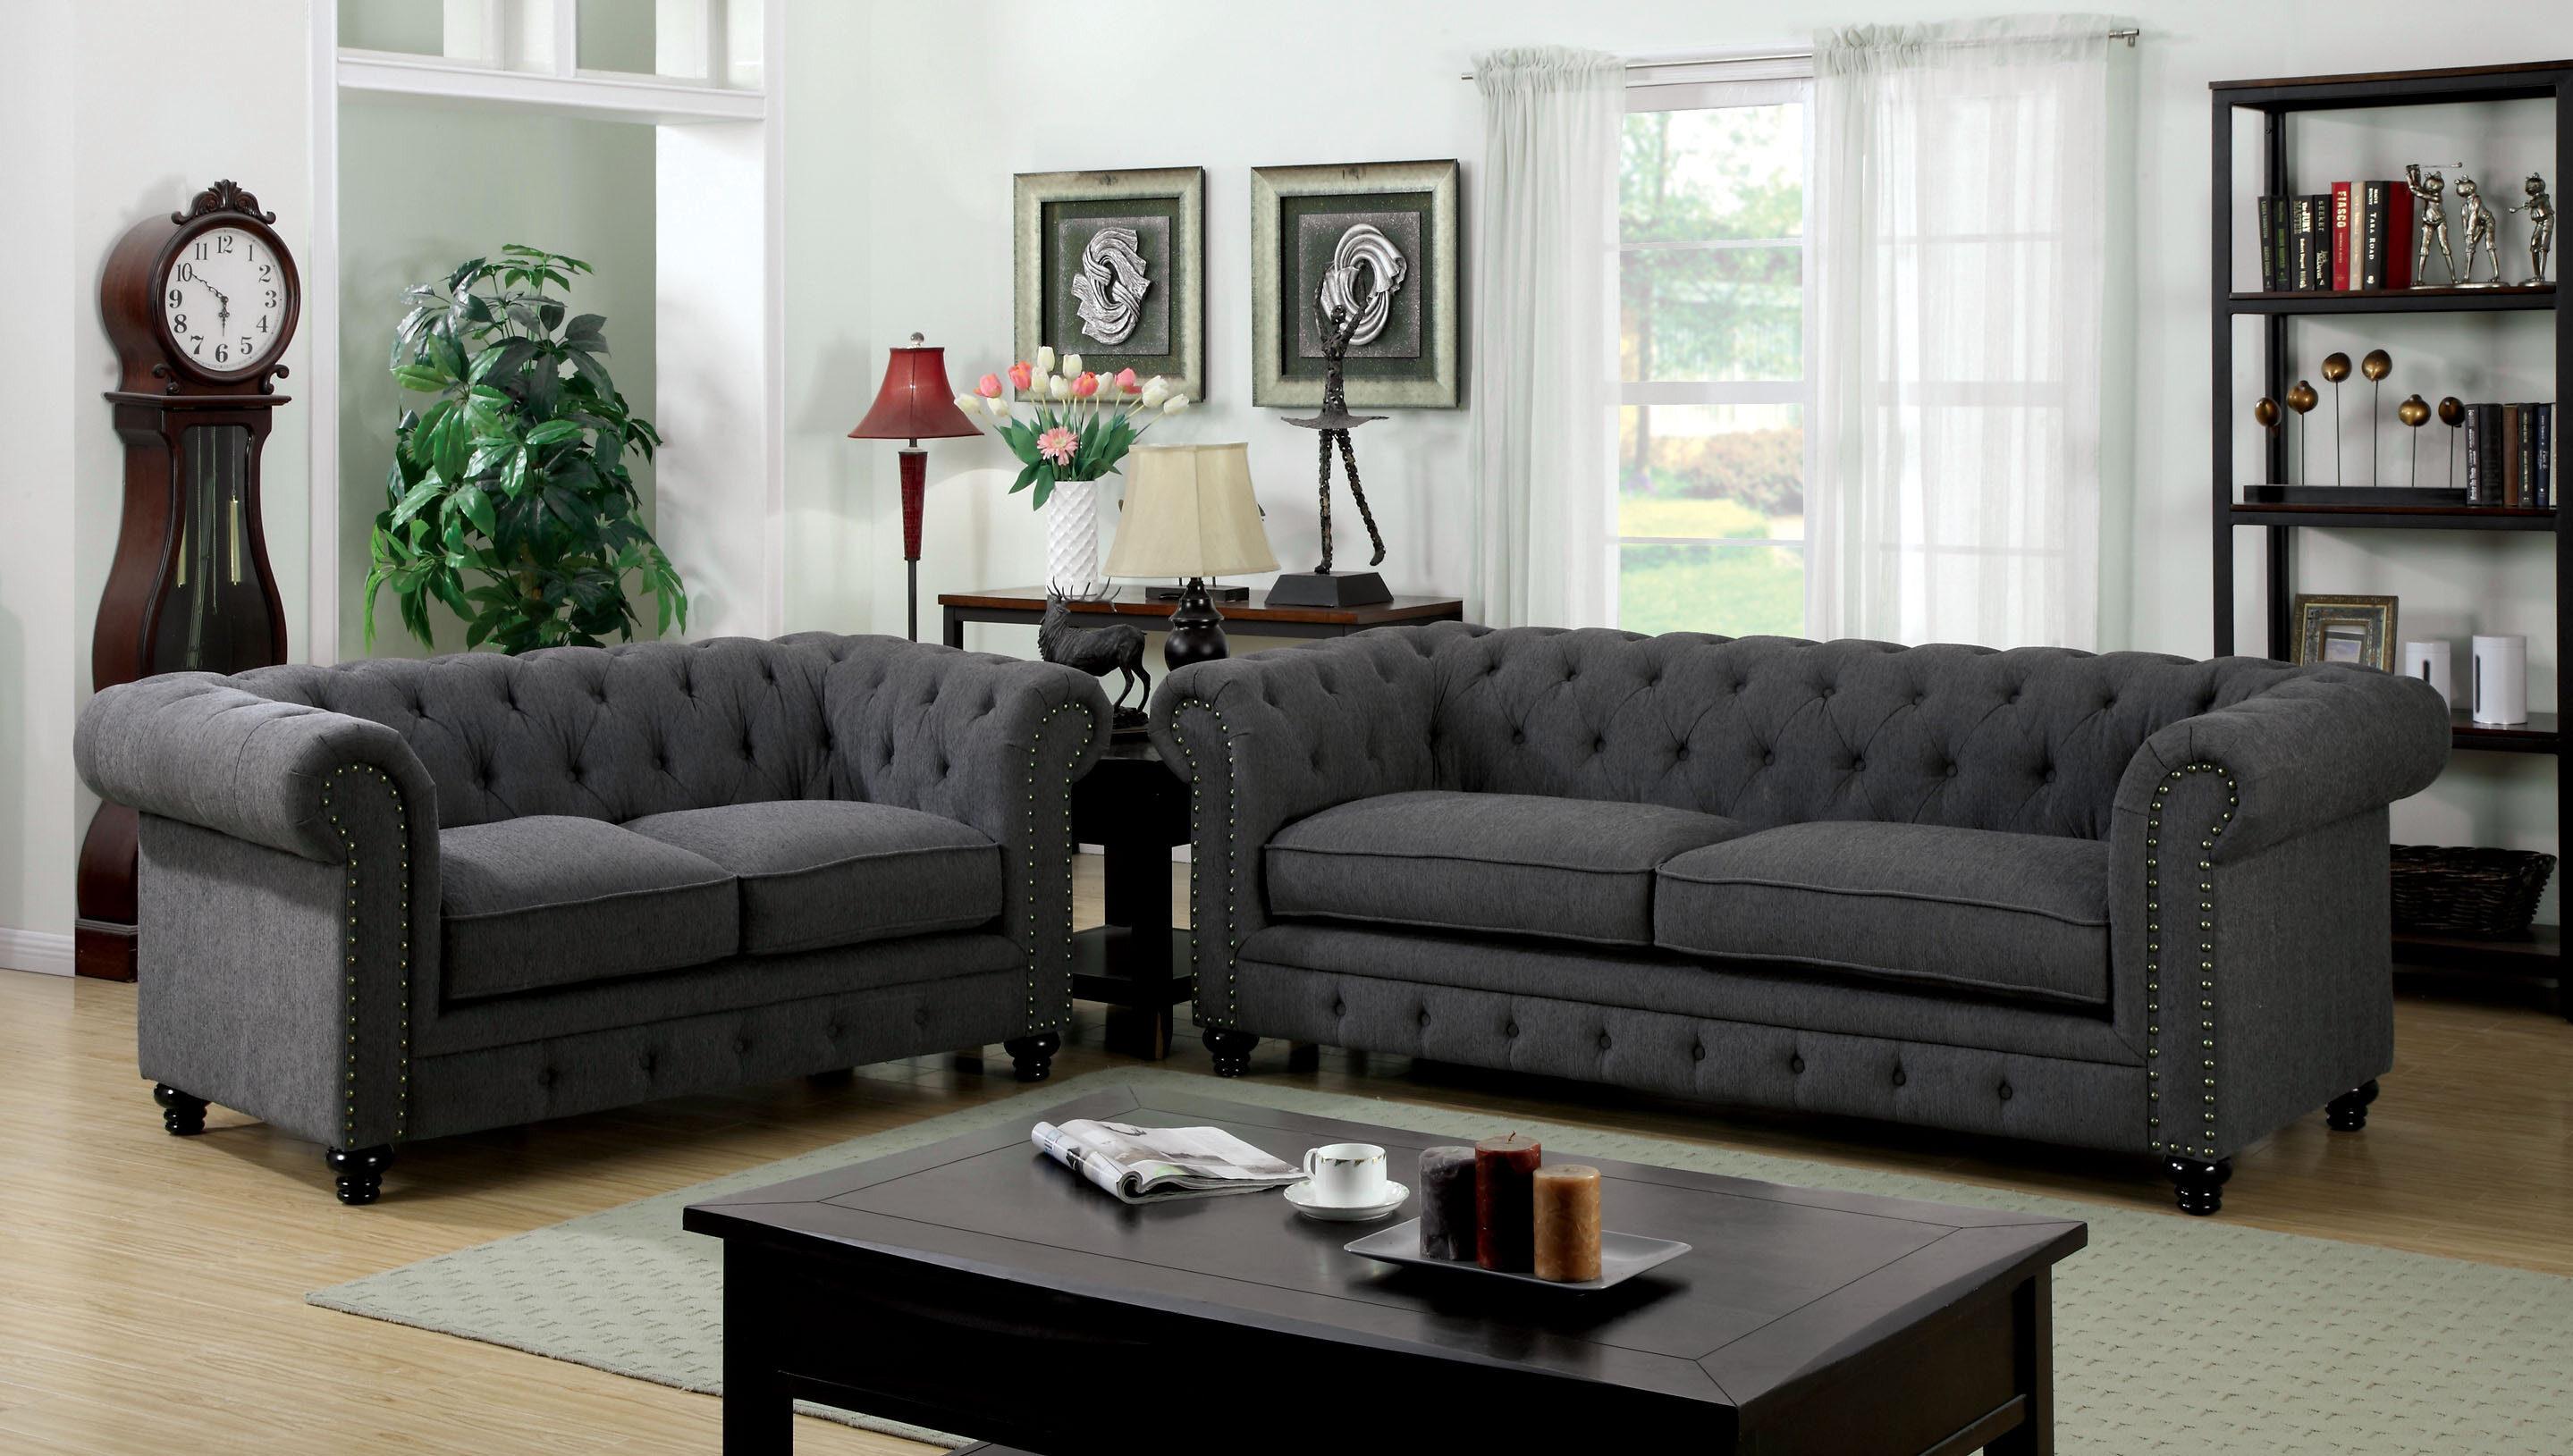 Westerly Standard Configurable Living Room Set